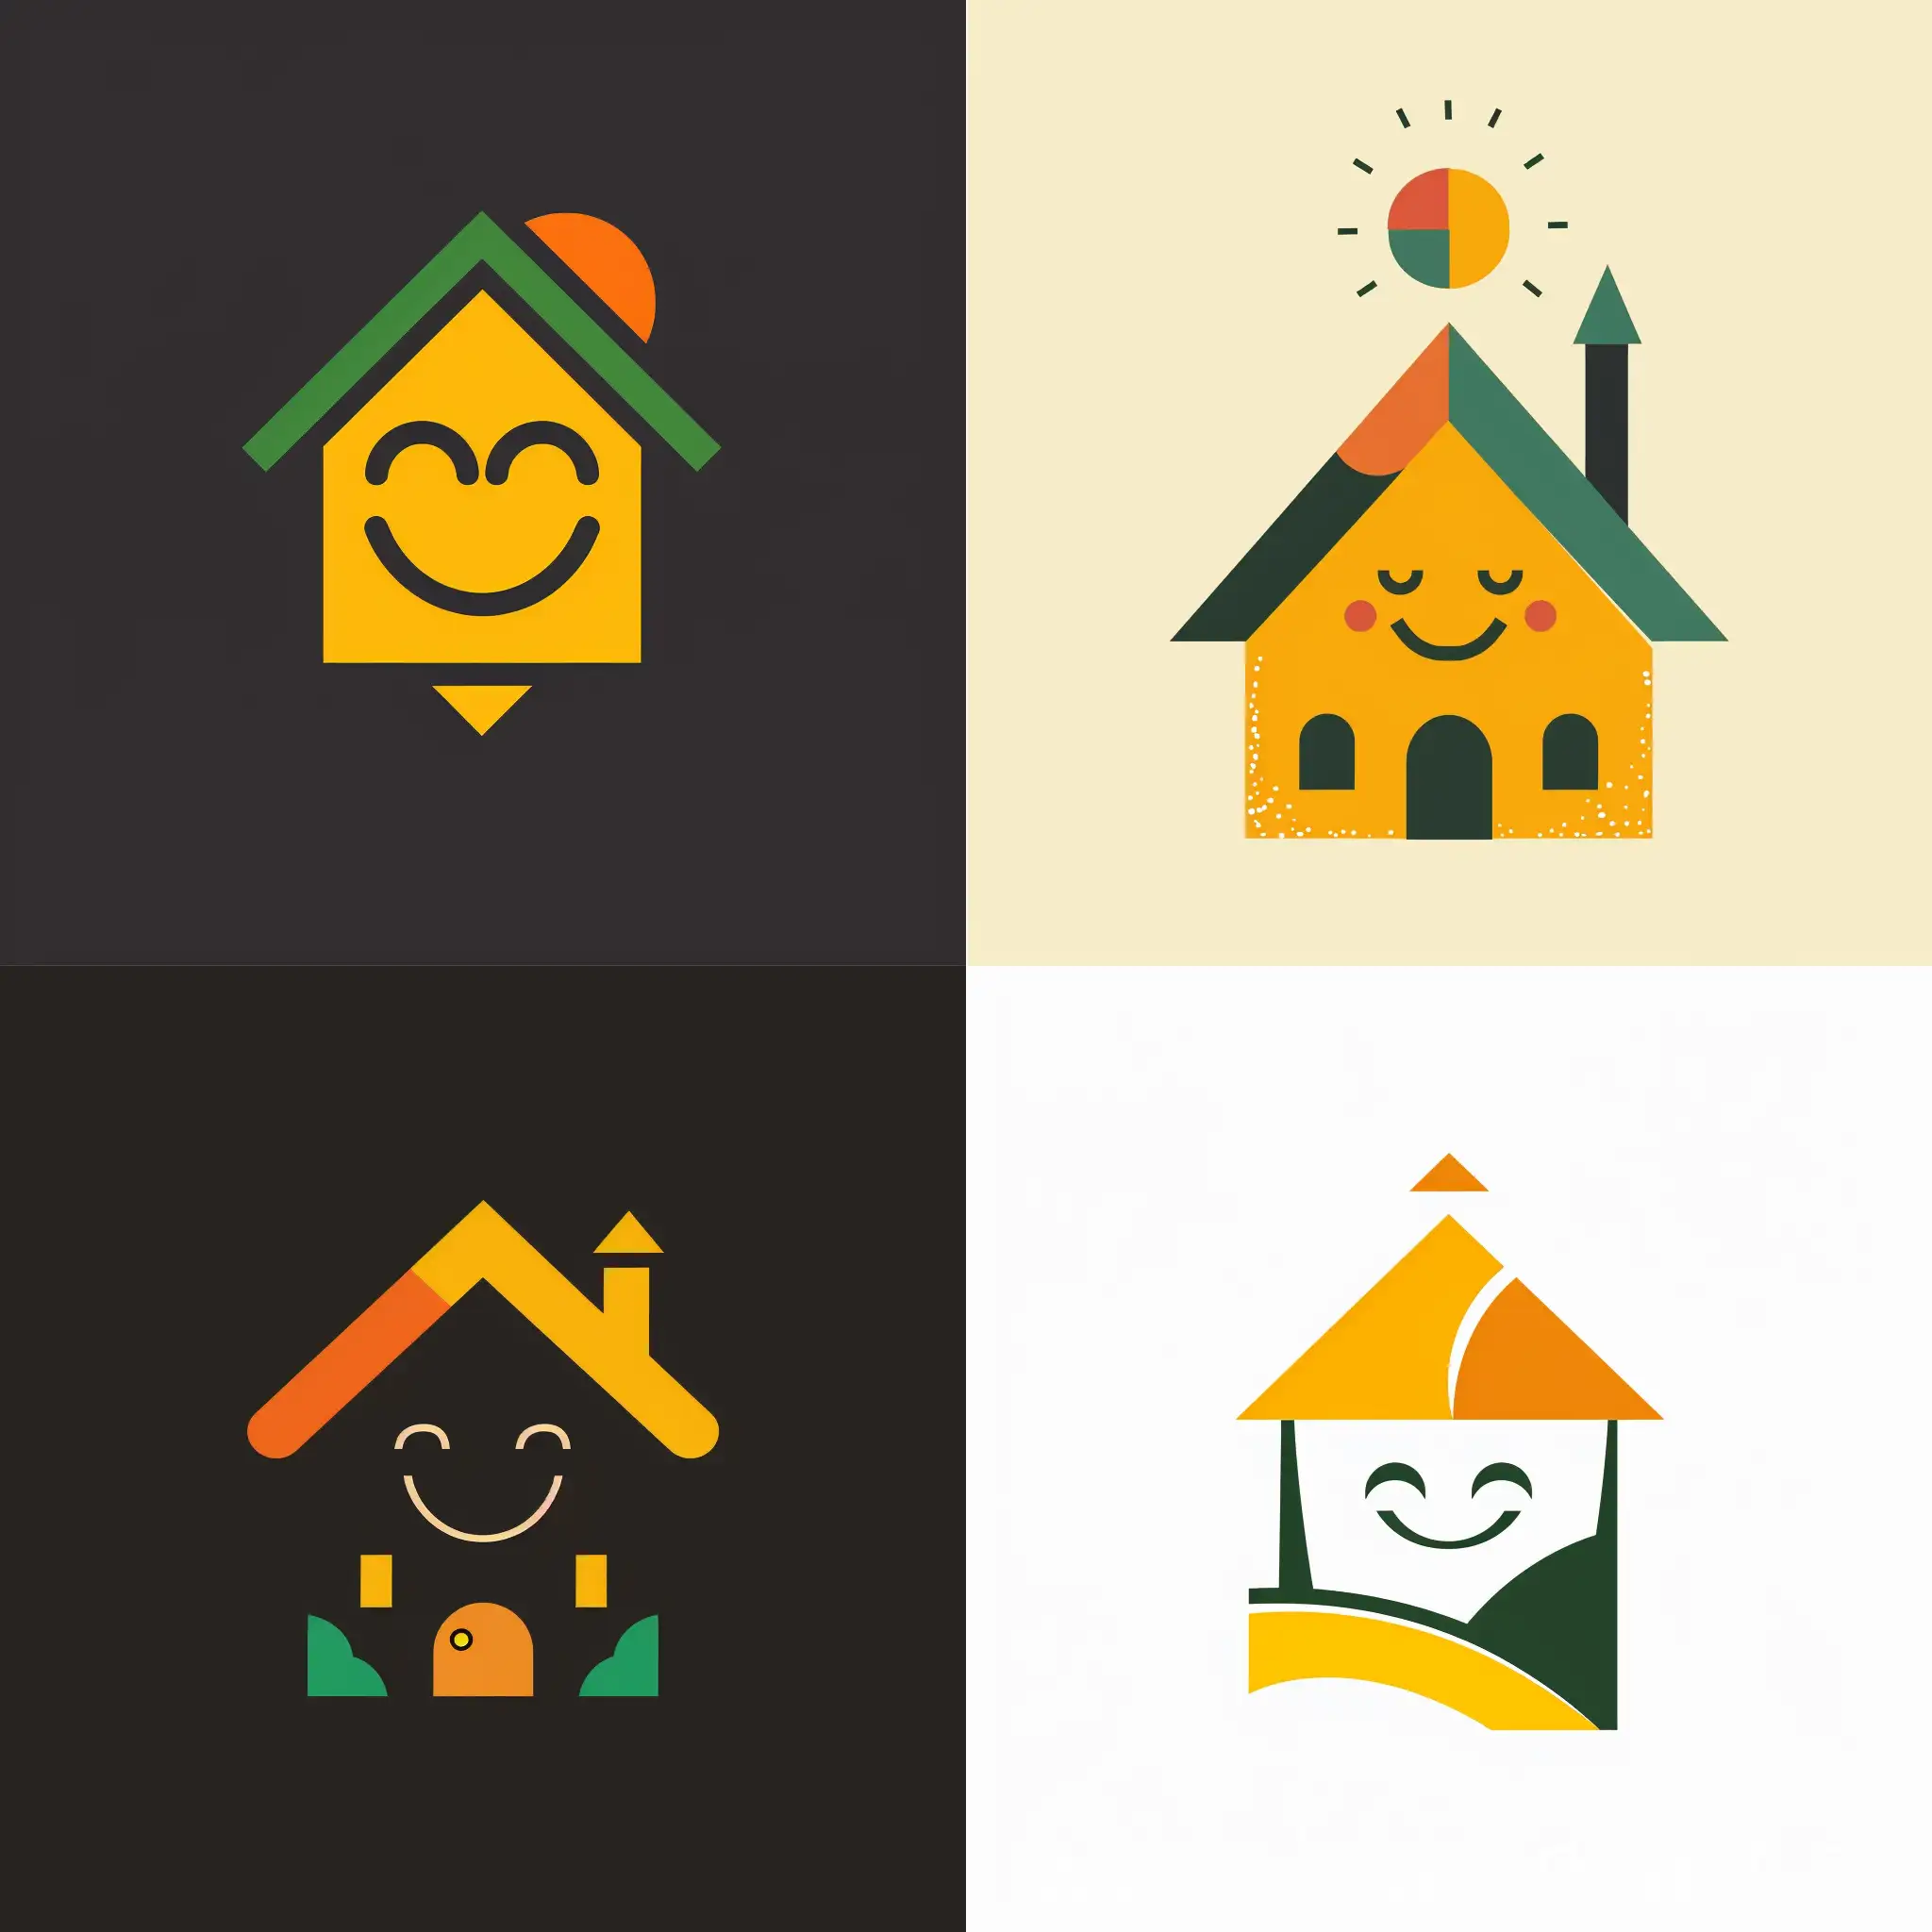 Minimalistic-Smiling-House-Logo-in-Strict-Style-with-Vibrant-Colors